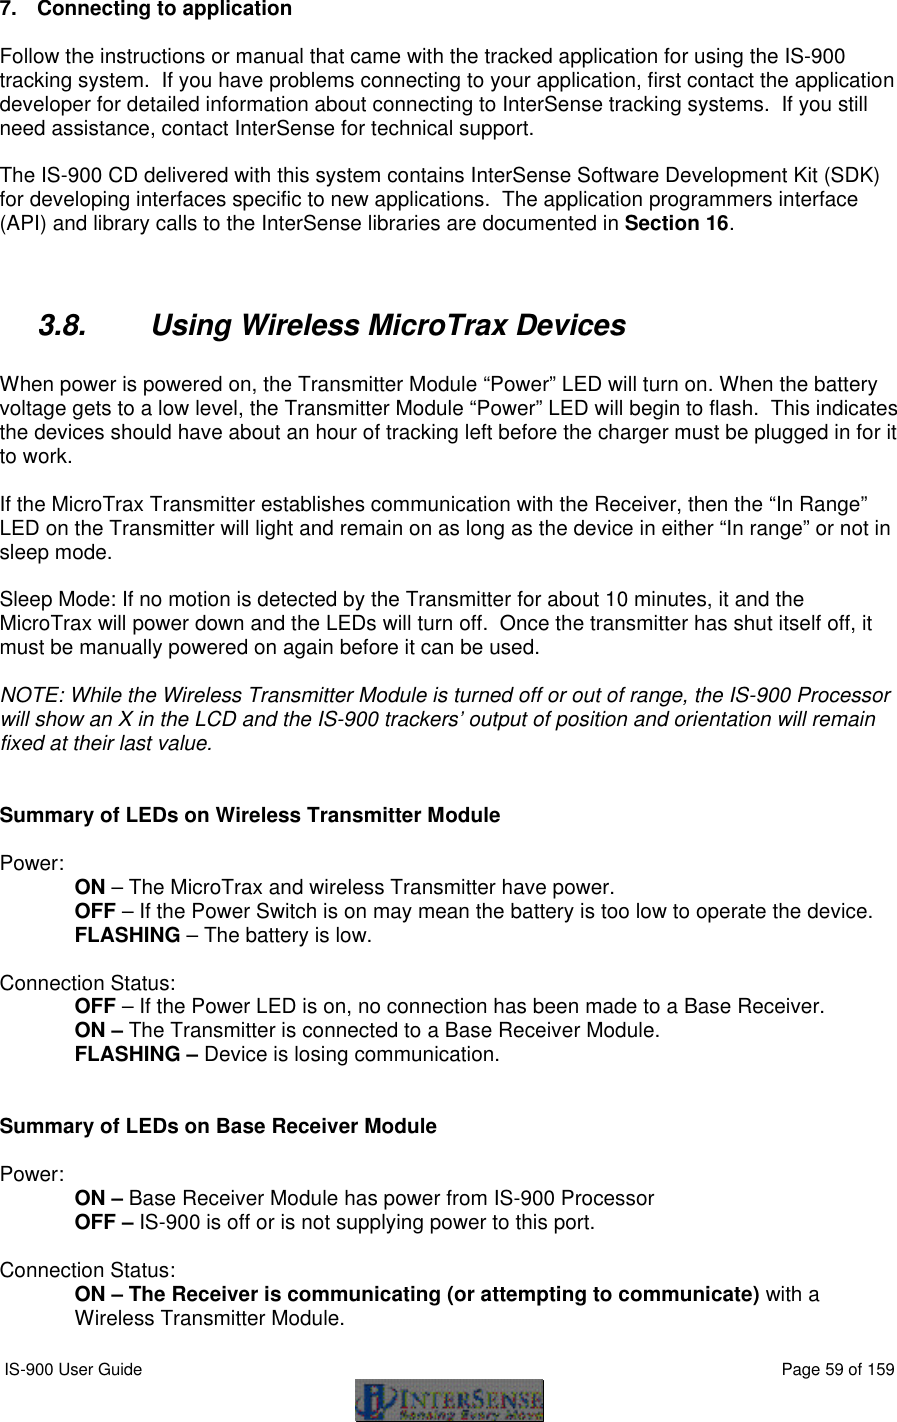  IS-900 User Guide                                                                                                                                          Page 59 of 159  7. Connecting to application   Follow the instructions or manual that came with the tracked application for using the IS-900 tracking system.  If you have problems connecting to your application, first contact the application developer for detailed information about connecting to InterSense tracking systems.  If you still need assistance, contact InterSense for technical support.  The IS-900 CD delivered with this system contains InterSense Software Development Kit (SDK) for developing interfaces specific to new applications.  The application programmers interface (API) and library calls to the InterSense libraries are documented in Section 16.   3.8. Using Wireless MicroTrax Devices  When power is powered on, the Transmitter Module “Power” LED will turn on. When the battery voltage gets to a low level, the Transmitter Module “Power” LED will begin to flash.  This indicates the devices should have about an hour of tracking left before the charger must be plugged in for it to work.  If the MicroTrax Transmitter establishes communication with the Receiver, then the “In Range” LED on the Transmitter will light and remain on as long as the device in either “In range” or not in sleep mode.     Sleep Mode: If no motion is detected by the Transmitter for about 10 minutes, it and the MicroTrax will power down and the LEDs will turn off.  Once the transmitter has shut itself off, it must be manually powered on again before it can be used.   NOTE: While the Wireless Transmitter Module is turned off or out of range, the IS-900 Processor will show an X in the LCD and the IS-900 trackers’ output of position and orientation will remain fixed at their last value.   Summary of LEDs on Wireless Transmitter Module  Power: ON – The MicroTrax and wireless Transmitter have power.  OFF – If the Power Switch is on may mean the battery is too low to operate the device. FLASHING – The battery is low.  Connection Status: OFF – If the Power LED is on, no connection has been made to a Base Receiver. ON – The Transmitter is connected to a Base Receiver Module.  FLASHING – Device is losing communication.   Summary of LEDs on Base Receiver Module  Power: ON – Base Receiver Module has power from IS-900 Processor OFF – IS-900 is off or is not supplying power to this port.  Connection Status: ON – The Receiver is communicating (or attempting to communicate) with a Wireless Transmitter Module. 